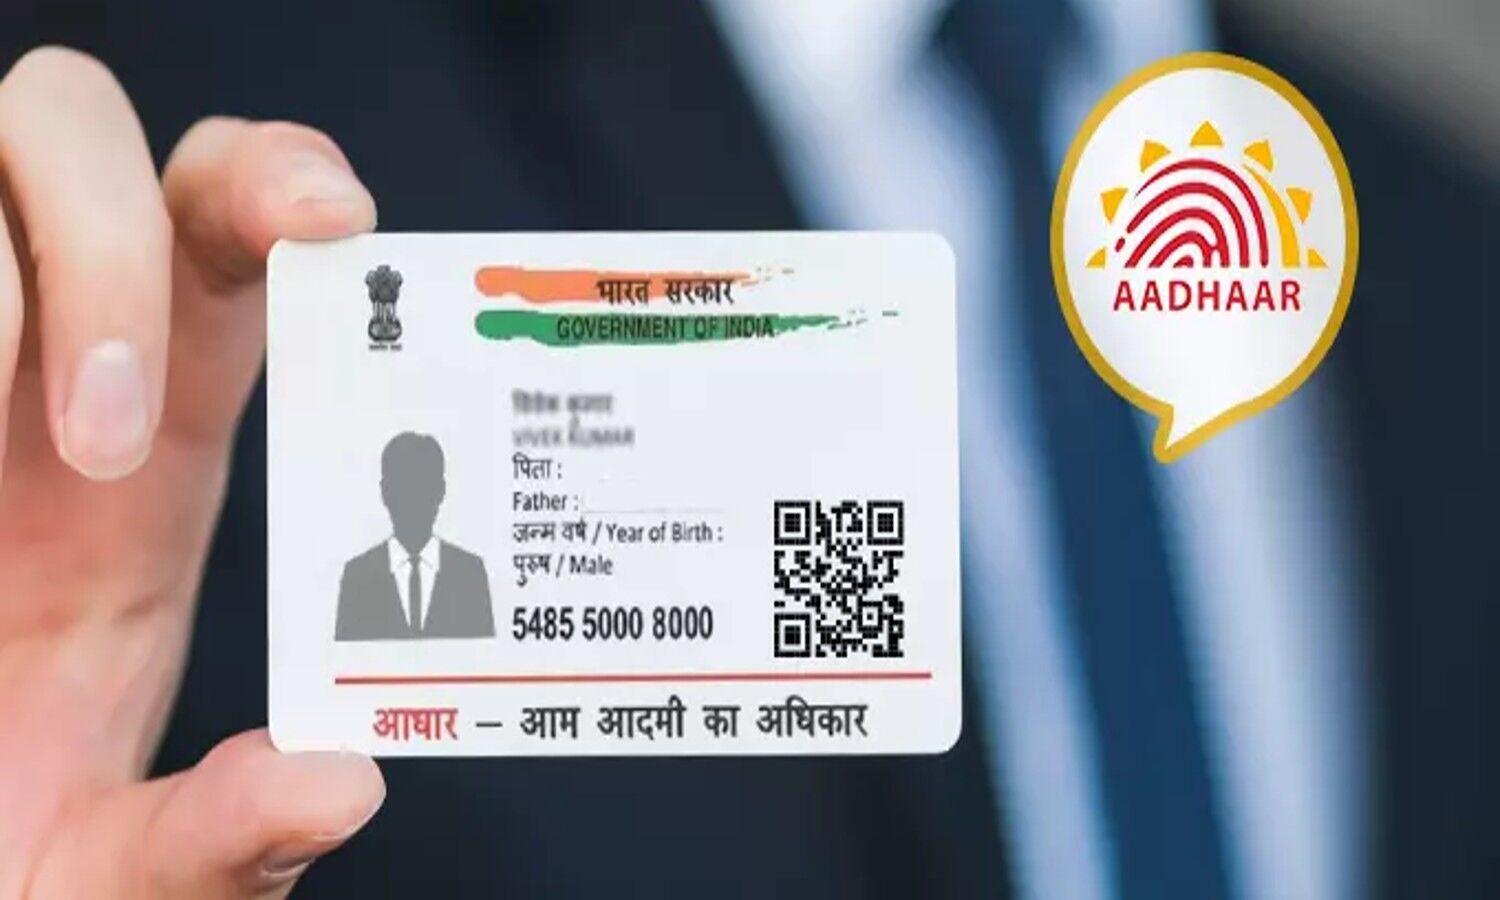 Aadhaar Card Update: Get this information updated in Aadhaar card, otherwise you will not get the benefit of any scheme